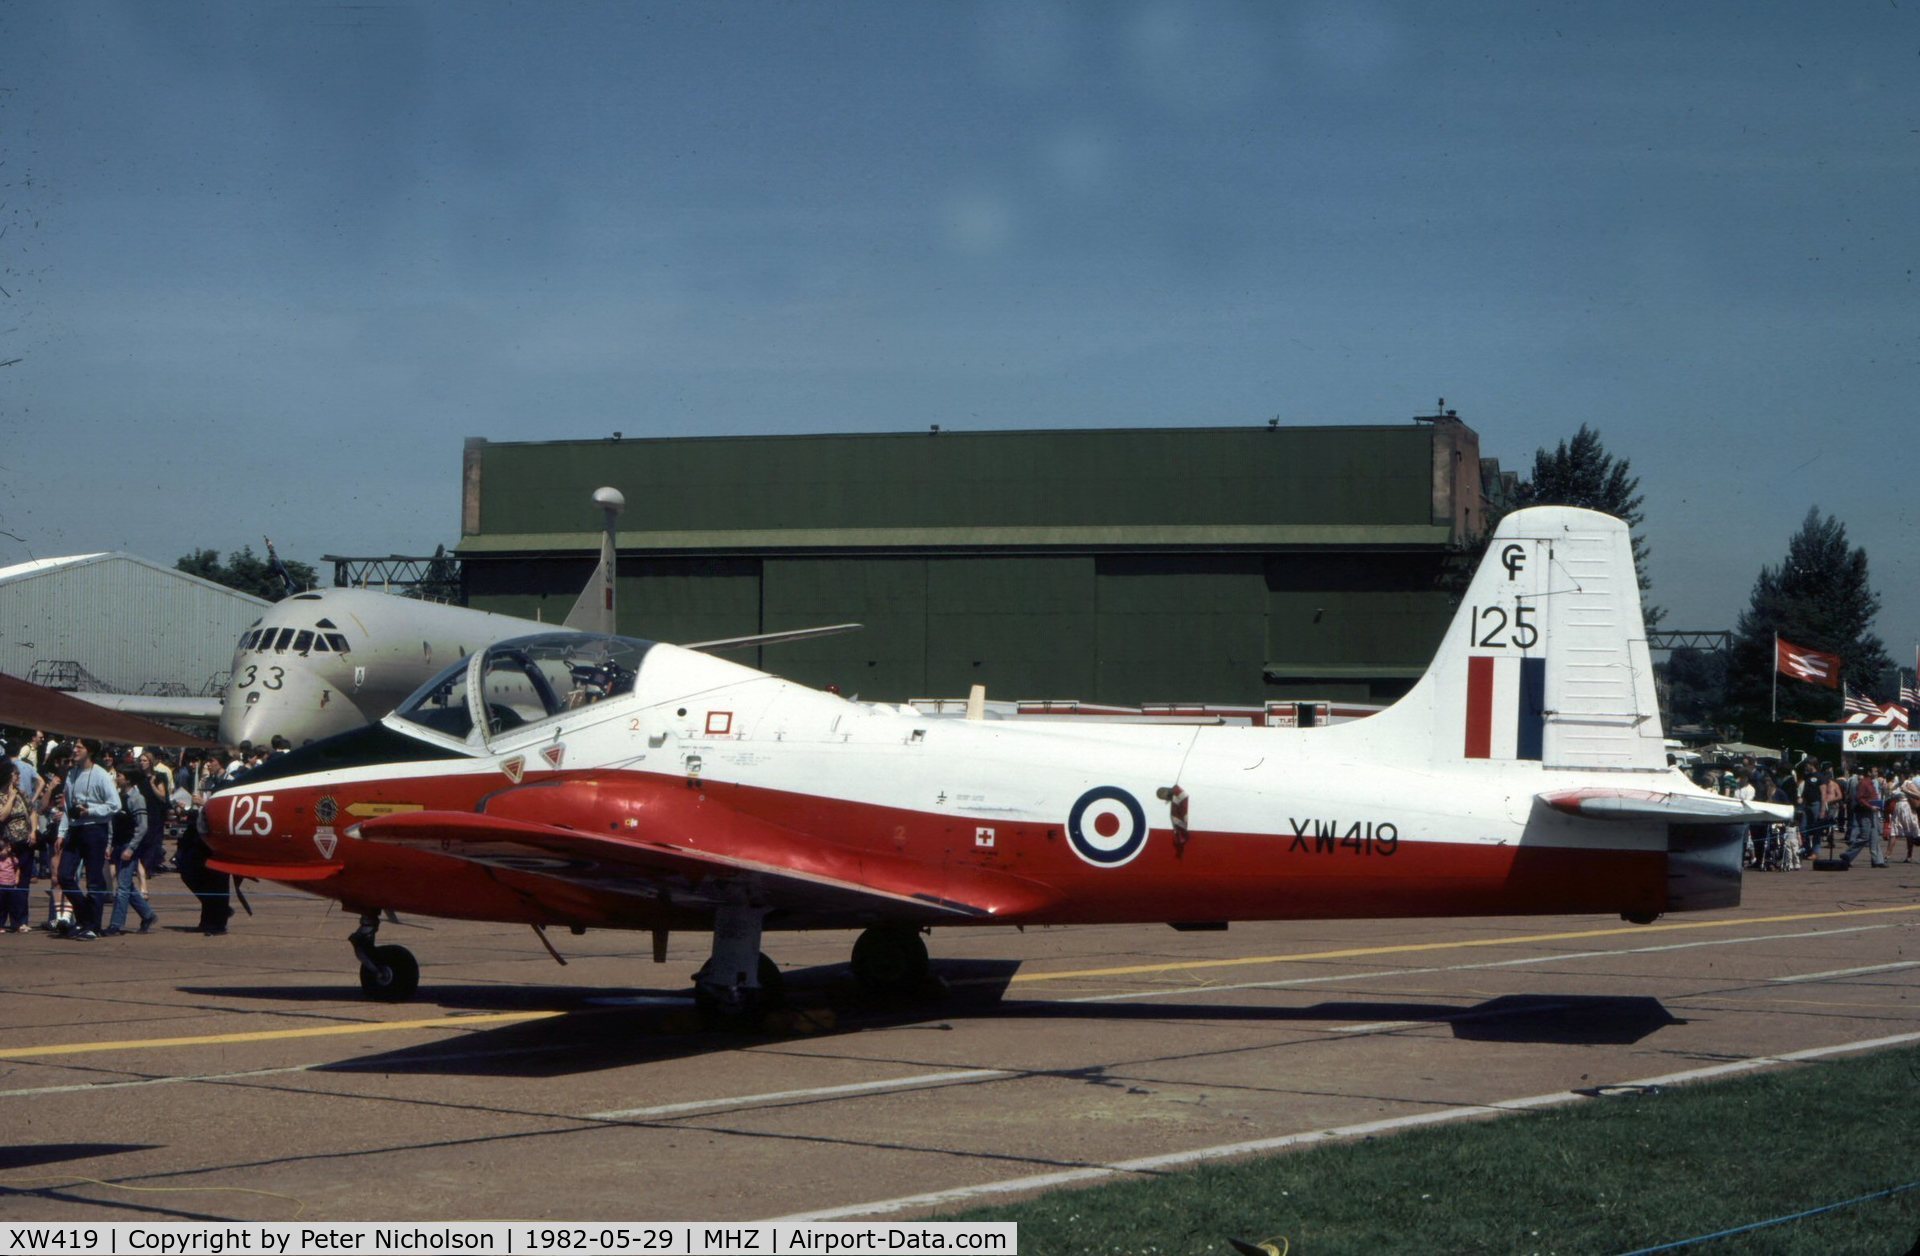 XW419, 1975 BAC 84 Jet Provost T.5A C/N EEP/JP/1041, Jet Provost T.5A of 7 Flying Training School displayed at the 1982 RAF Mildenhall Air Fete.